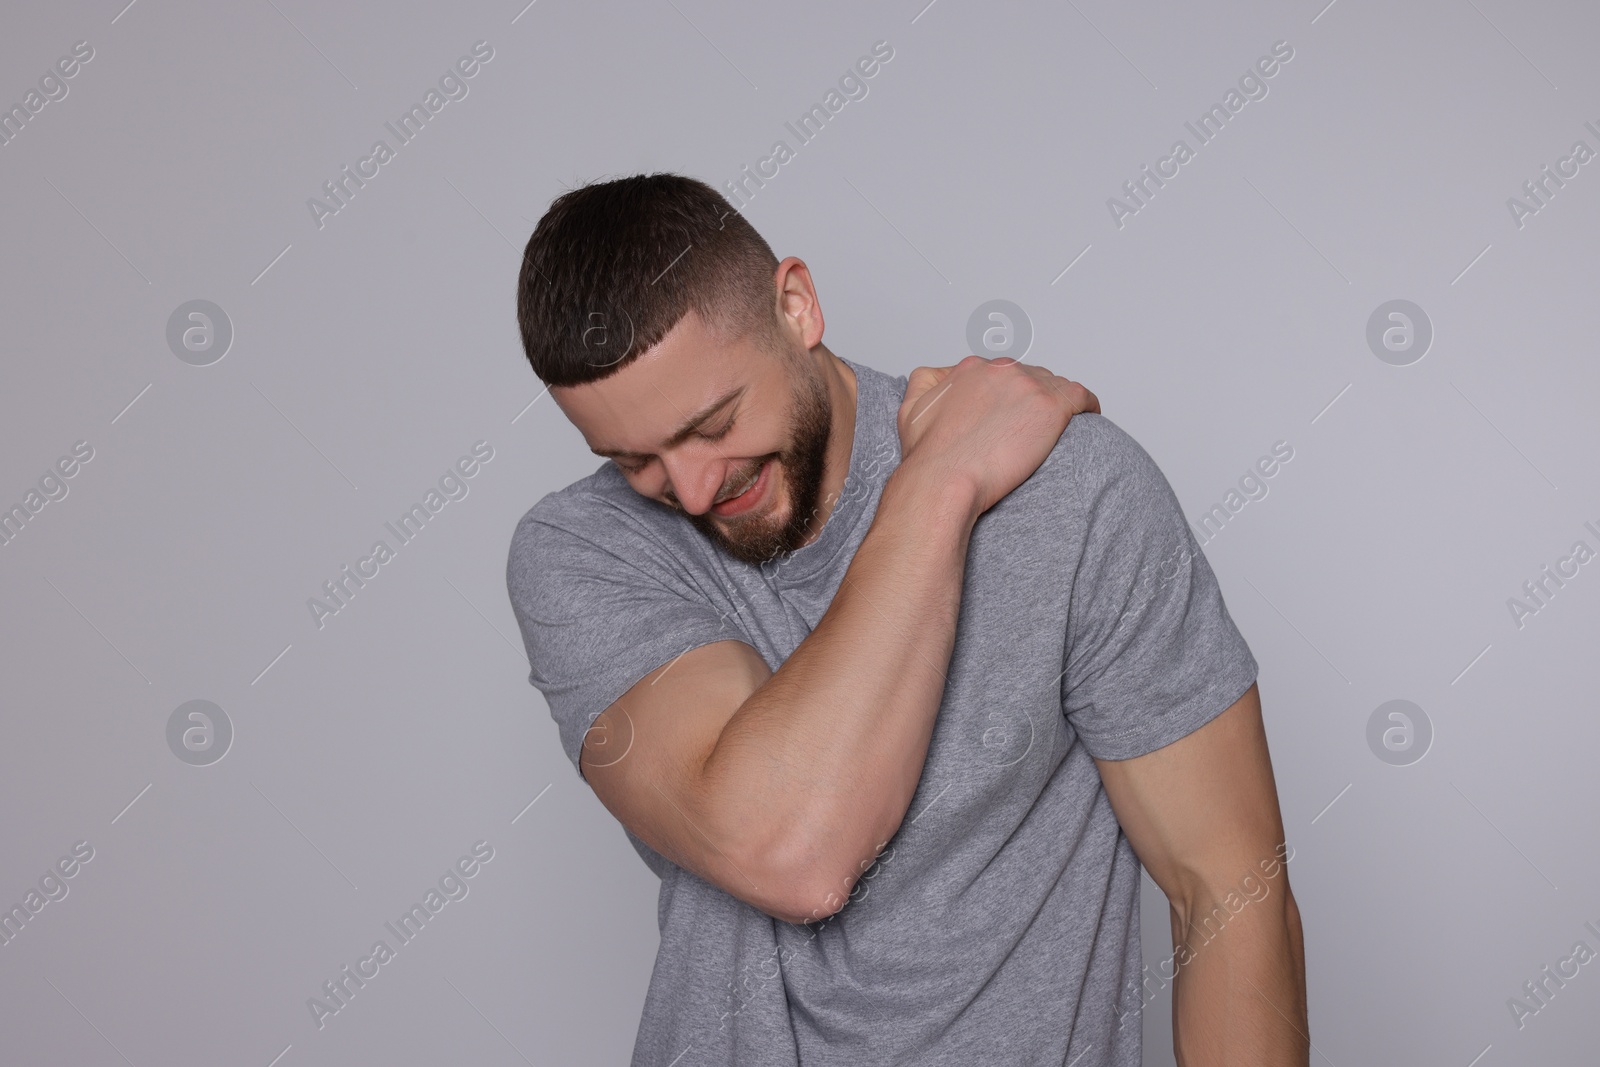 Photo of Man suffering from pain in his shoulder on light grey background. Arthritis symptom